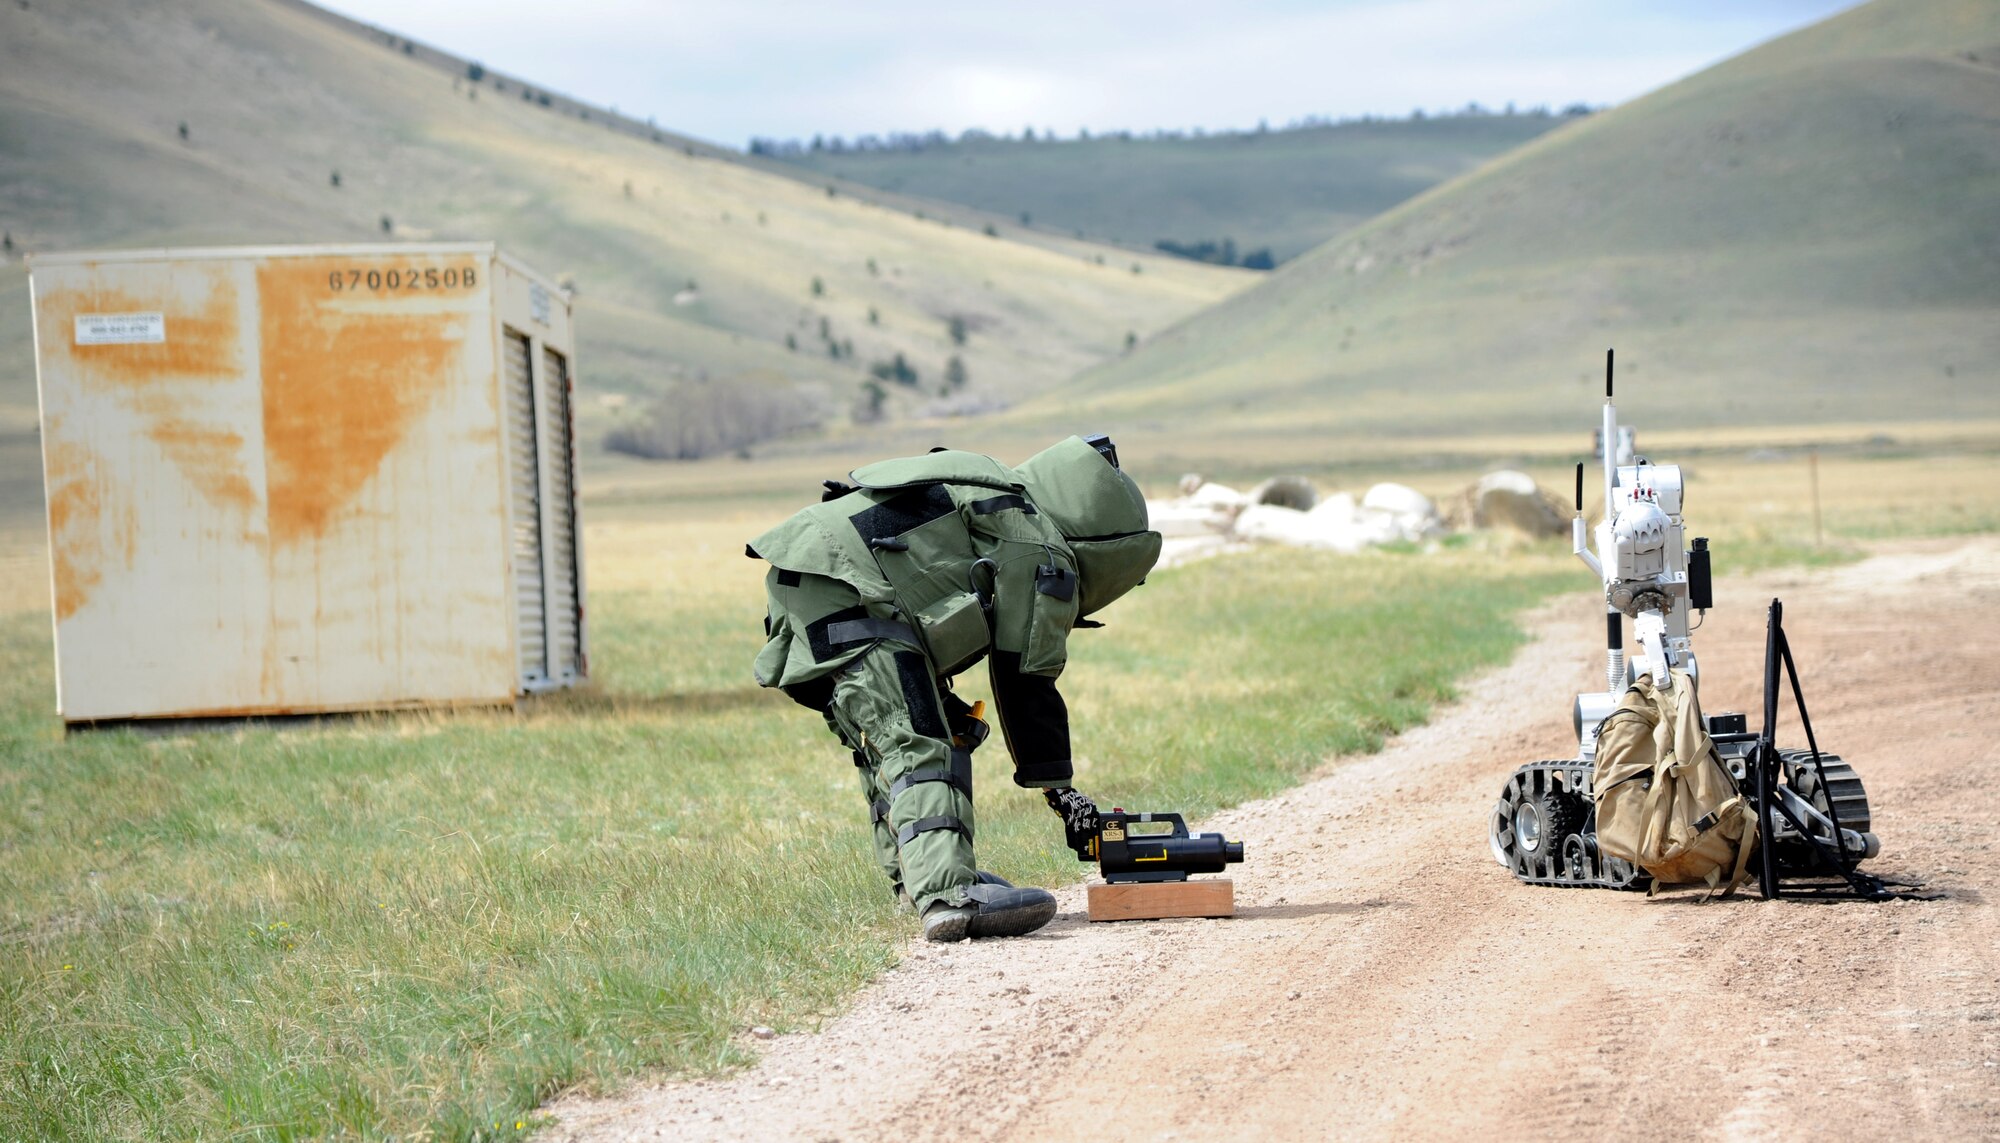 Tech Sgt. Scott Lawson, 120th Airlift Wing Explosive Ordinance Disposal technician, prepares to x-ray a backpack to verify its content while an Air Force Medium-Sized Robot holds the backpack.  During a training exercise, EOD technicians practiced on examples of overseas and stateside improvised explosive devices. (U.S. Air Force photo/ Airman 1st Class Joshua Smoot)